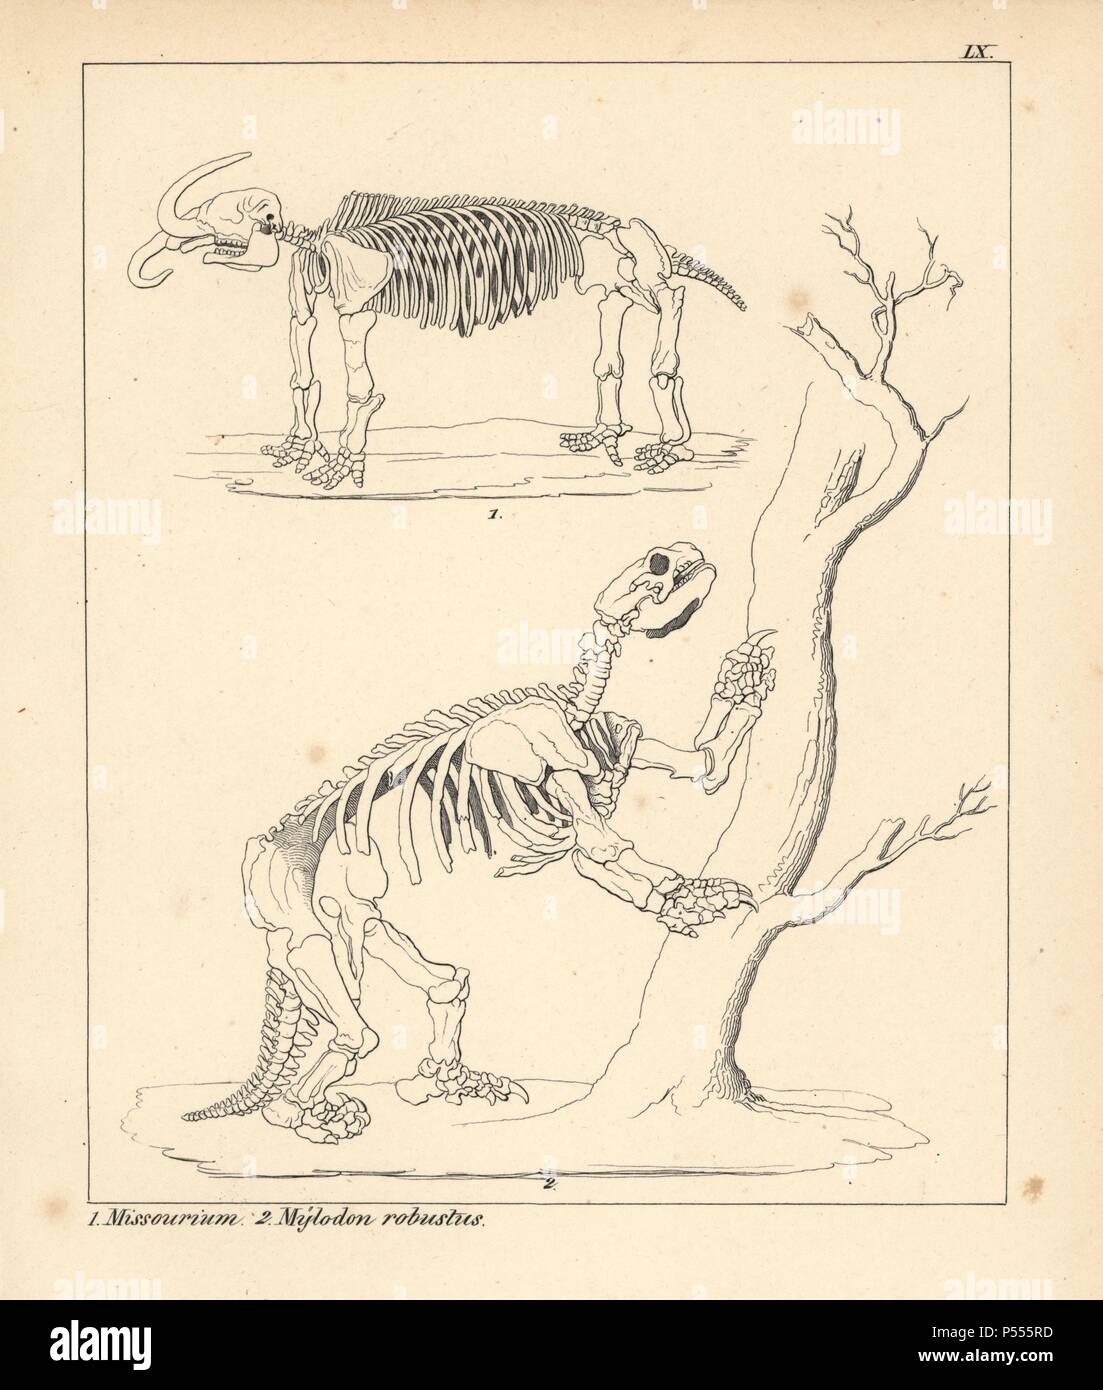 Skeleton of the American mastodon, Mammut americanum, Missourium, and extinct giant ground sloth, Mylodon robustus. Lithograph by an unknown artist from Dr. F.A. Schmidt's "Petrefactenbuch," published in Stuttgart, Germany, 1855 by Verlag von Krais & Hoffmann. Dr. Schmidt's "Book of Petrification" introduced fossils and palaeontology to both the specialist and general reader. Stock Photo